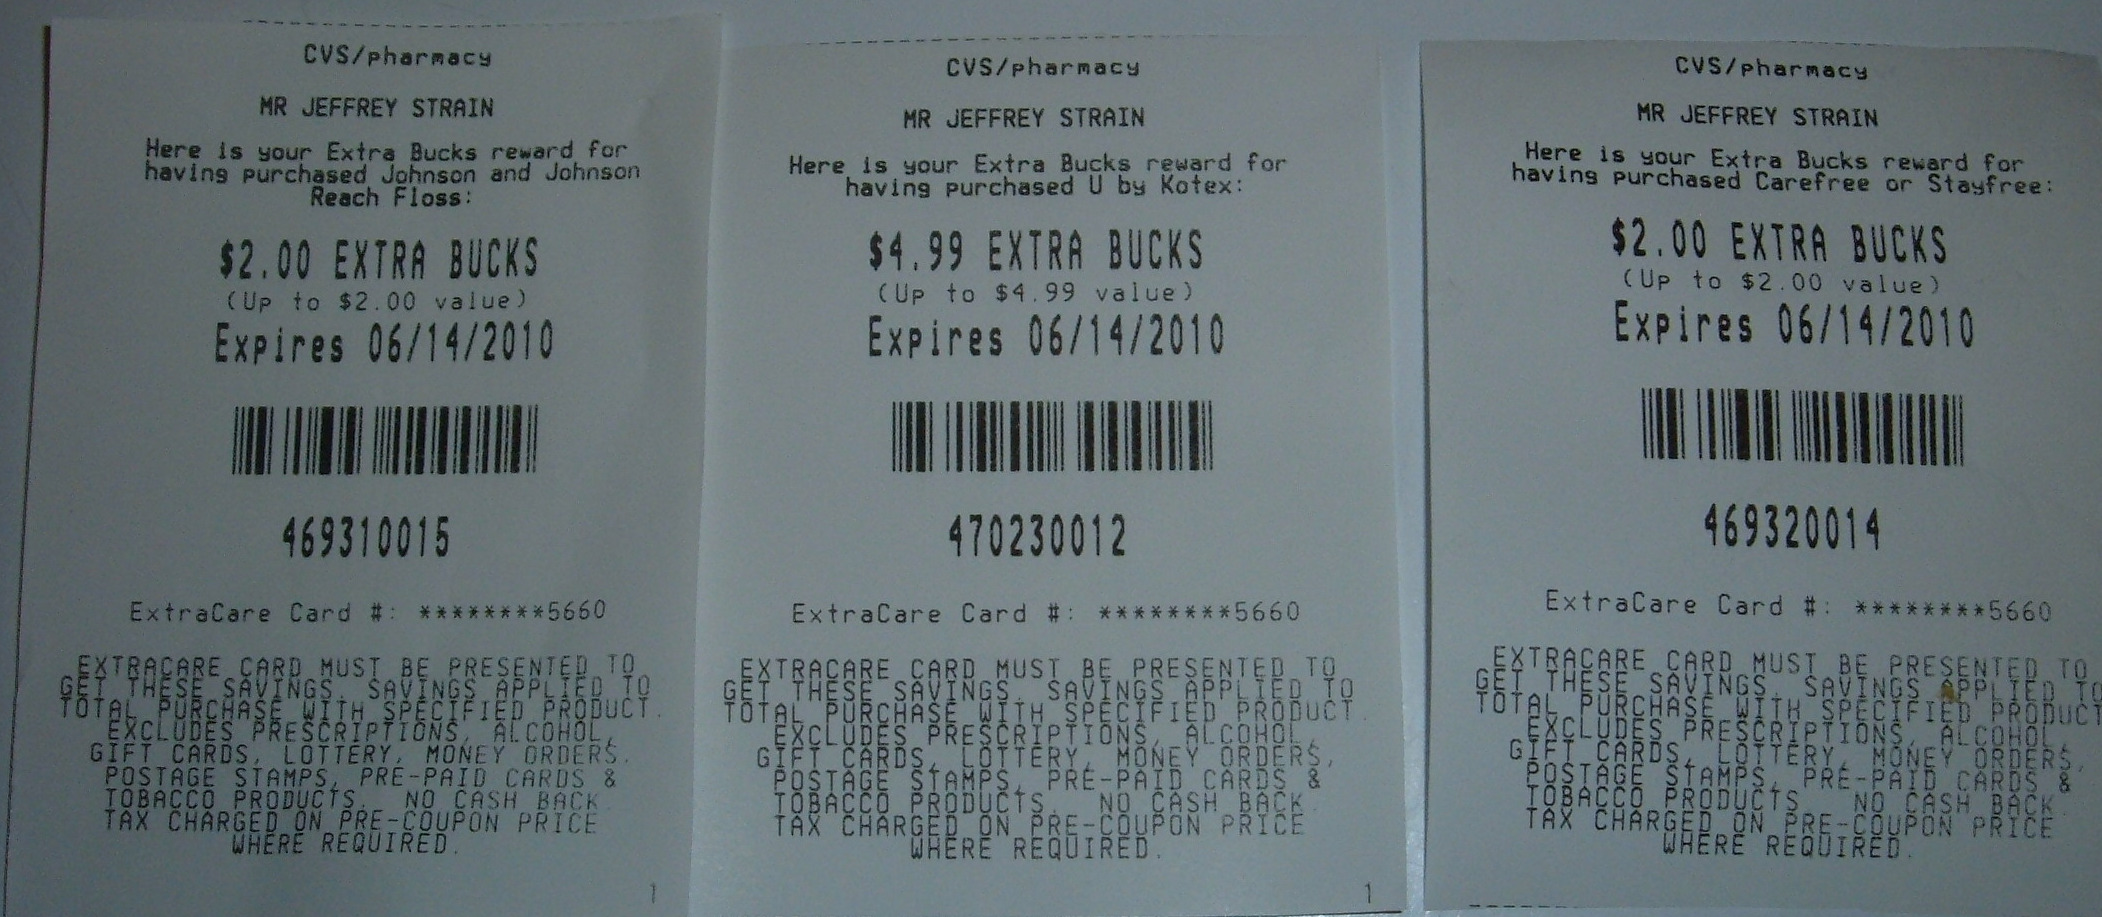 day 15 CVS extra bucks - Grocery Coupon Guide